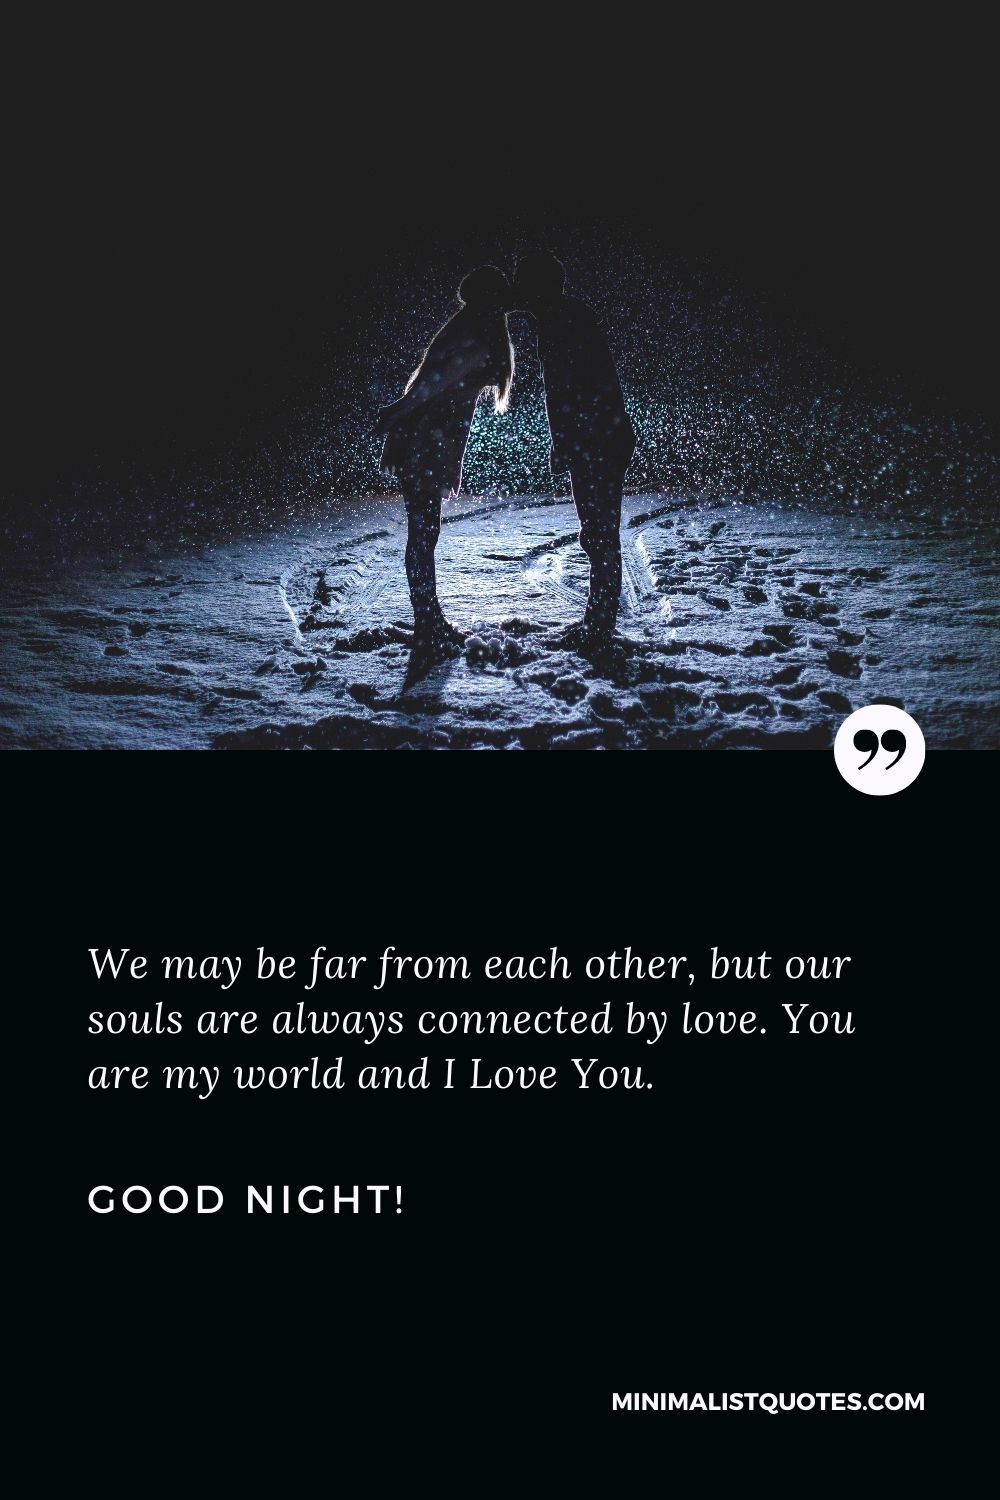 Good night I love you: We may be far from each other, but our souls are always connected by love. You are my world and I Love You. Good Night!